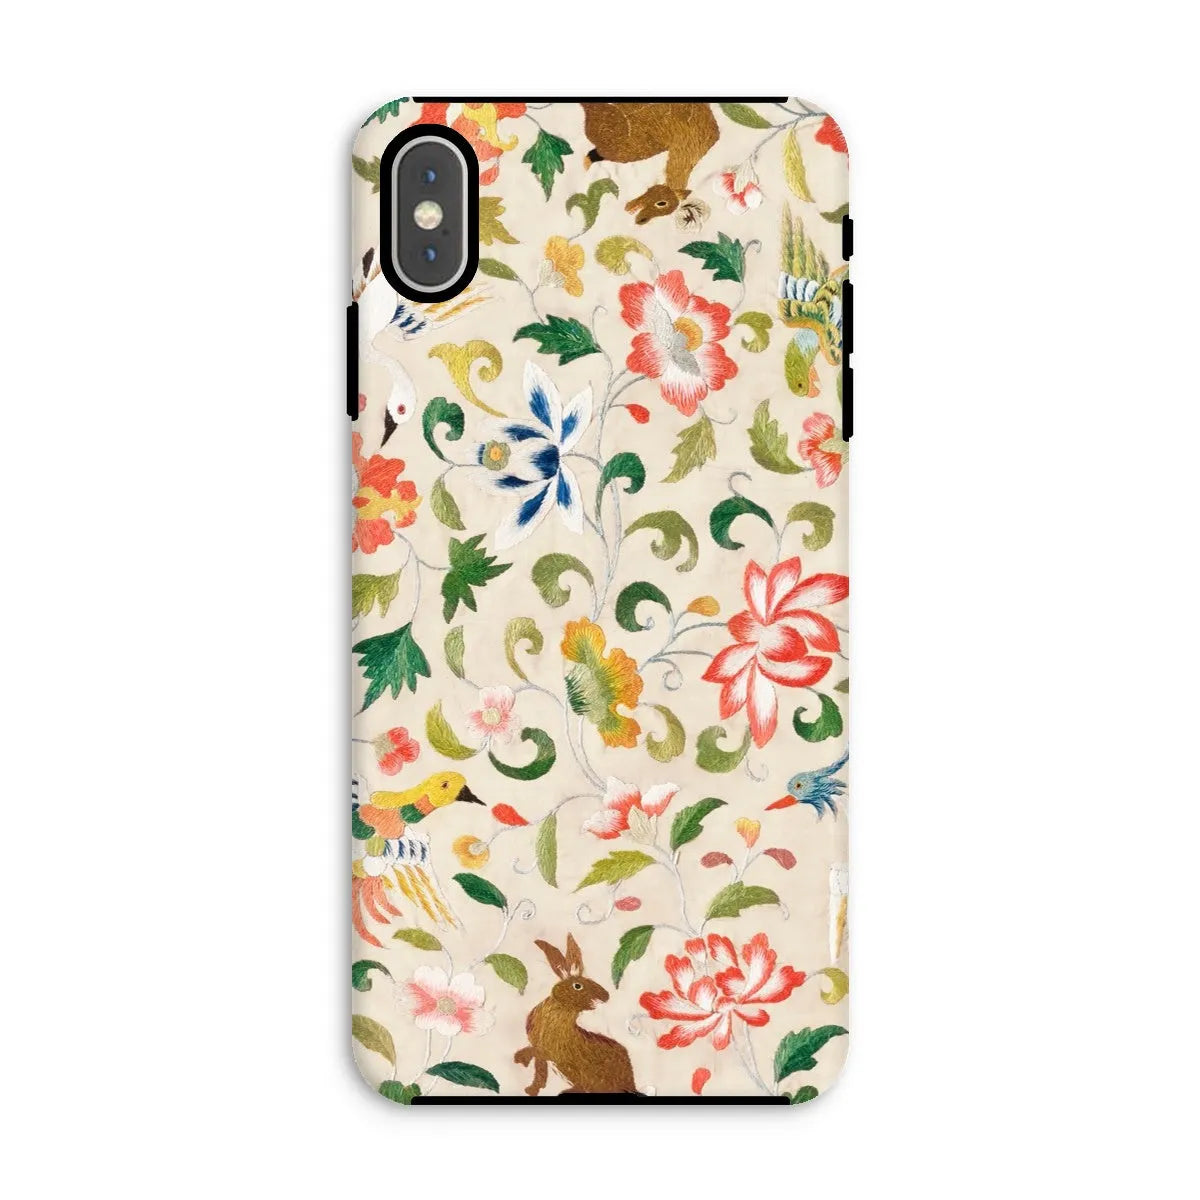 Crittersweet Symphony Tough Phone Case - Iphone Xs Max / Matte - Mobile Phone Cases - Aesthetic Art